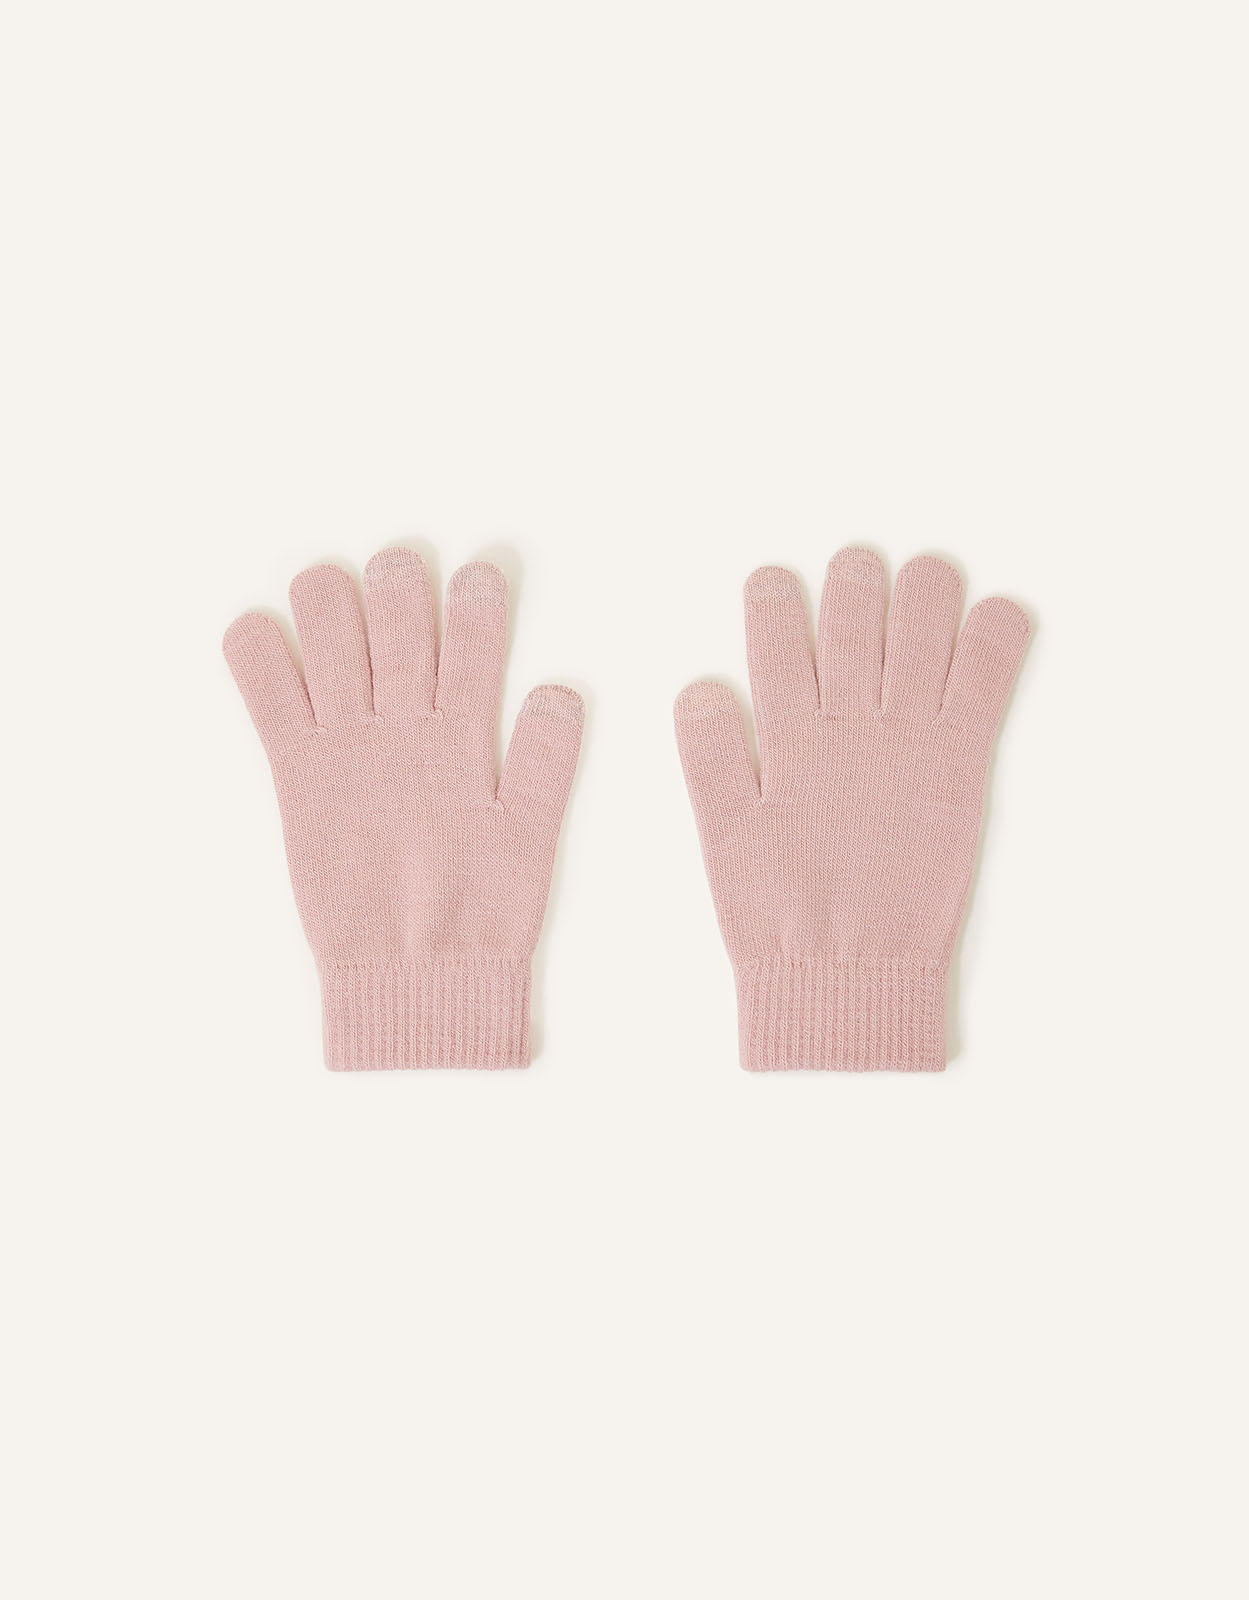 Accessorize Super Pale Pink Stretch Touch Gloves, Size: One Size